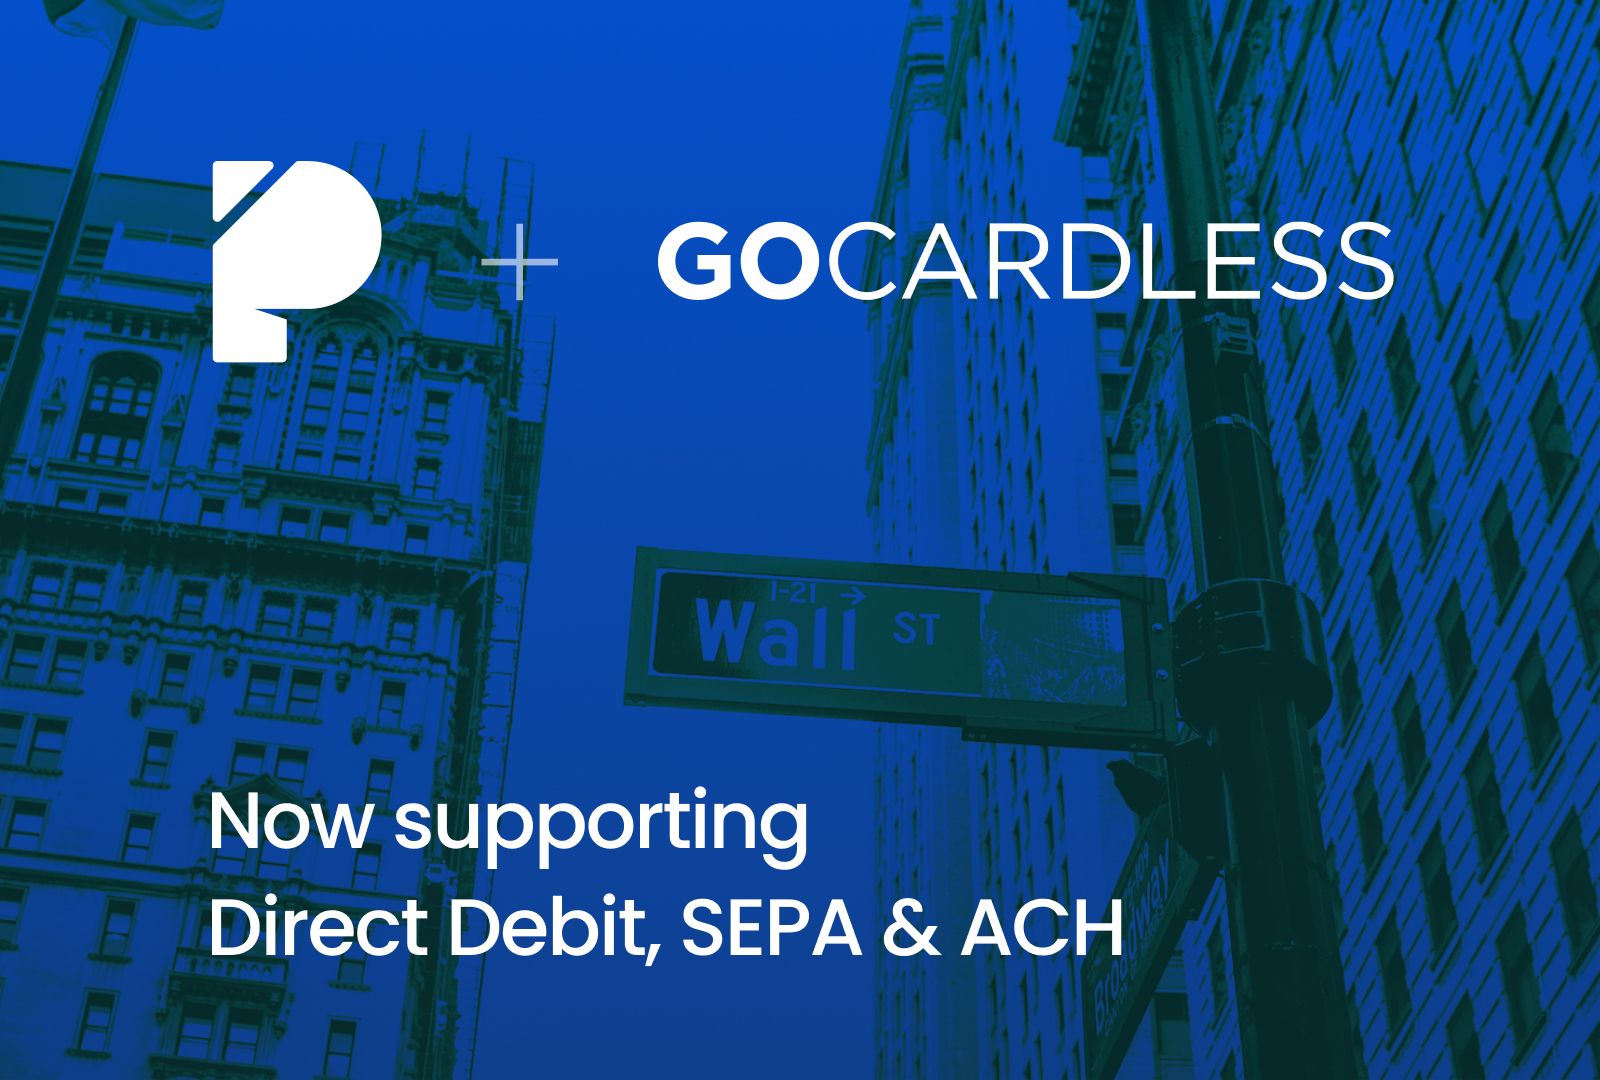 We now support Direct Debit, SEPA and ACH